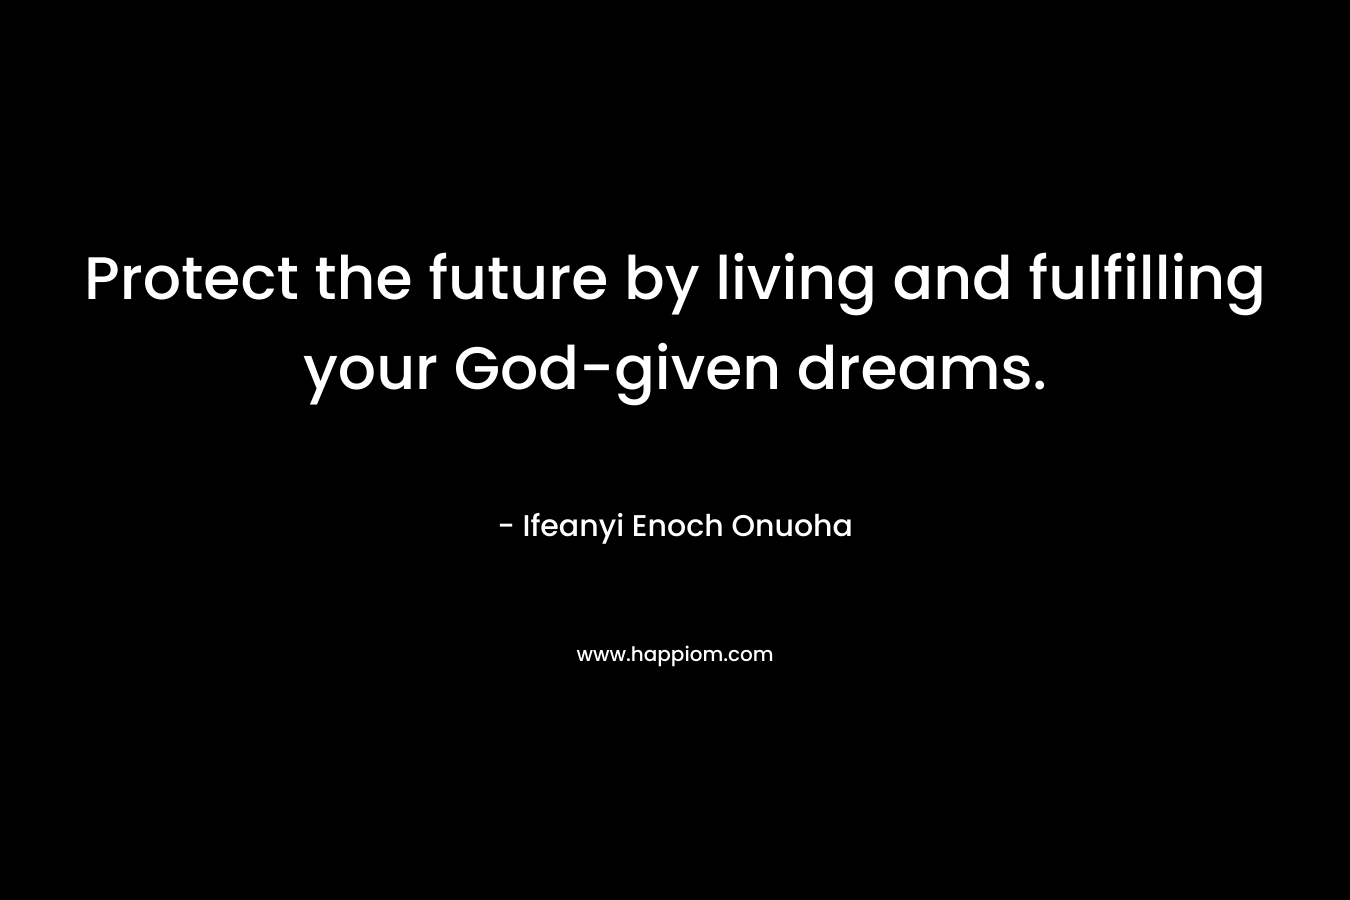 Protect the future by living and fulfilling your God-given dreams.